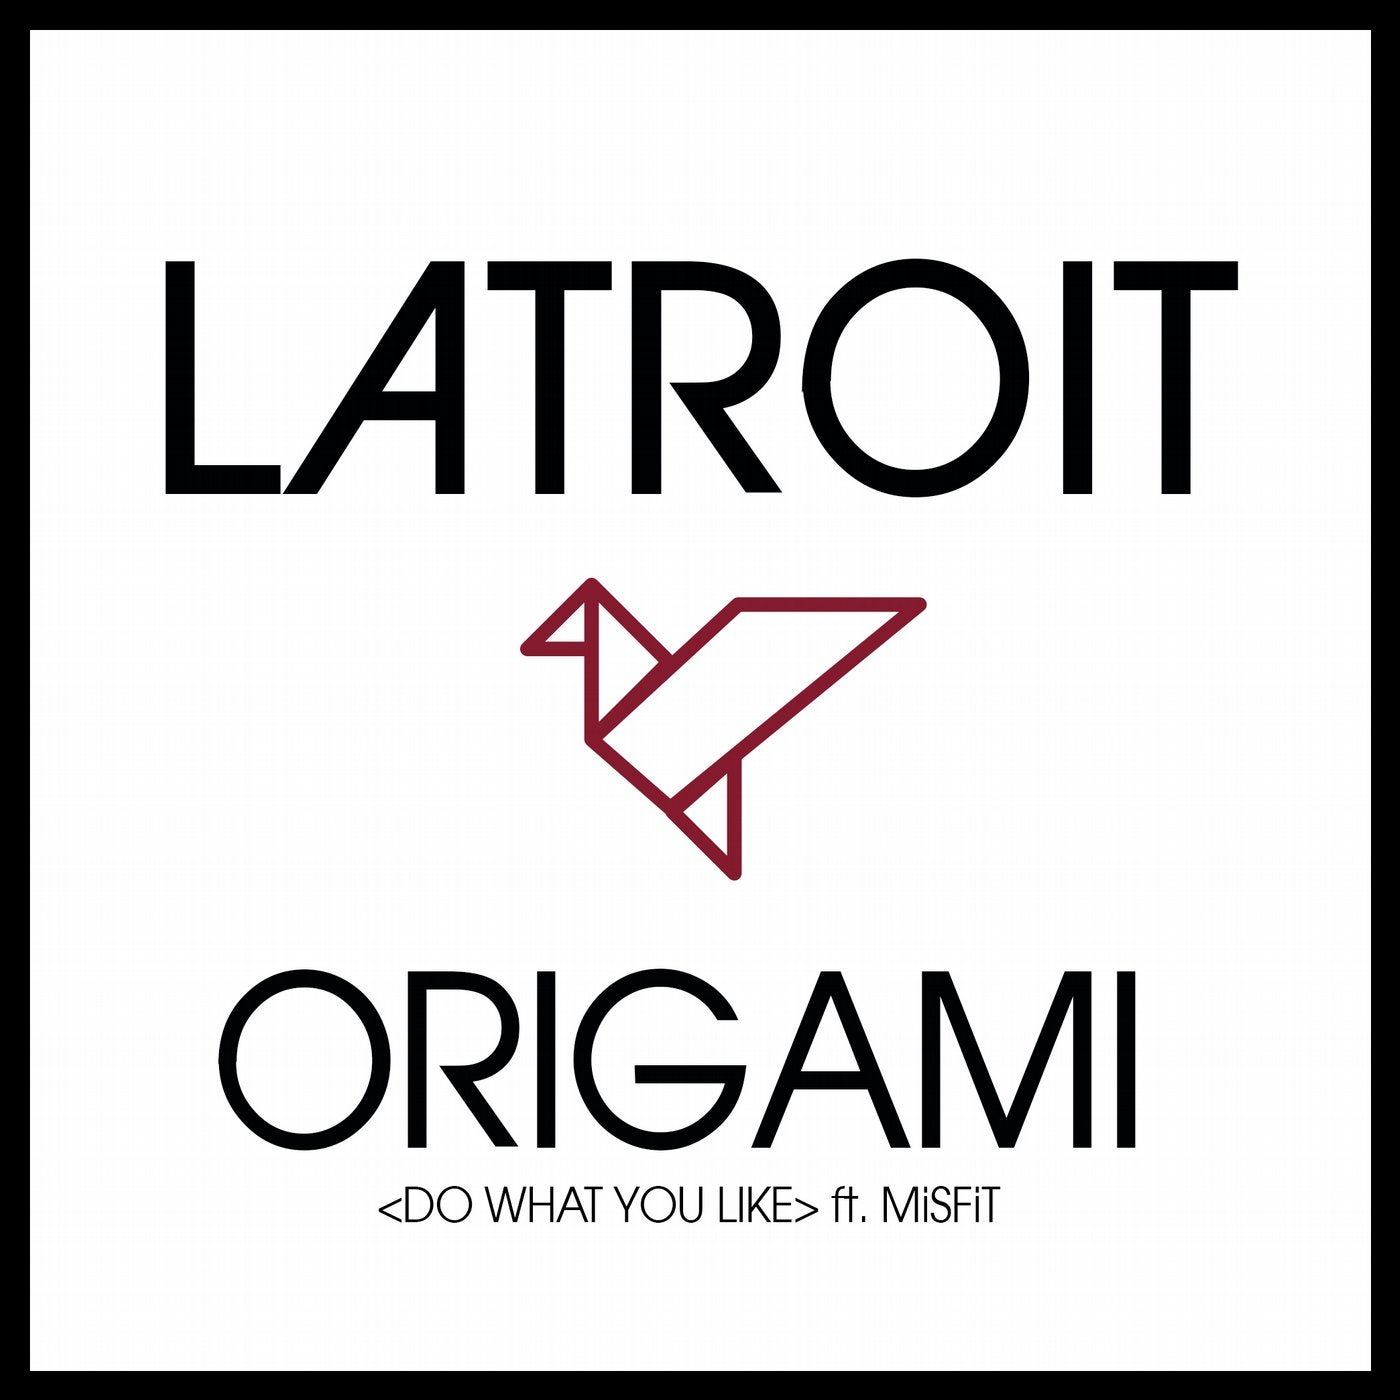 Origami (Do What You Like) feat. MiSFiT